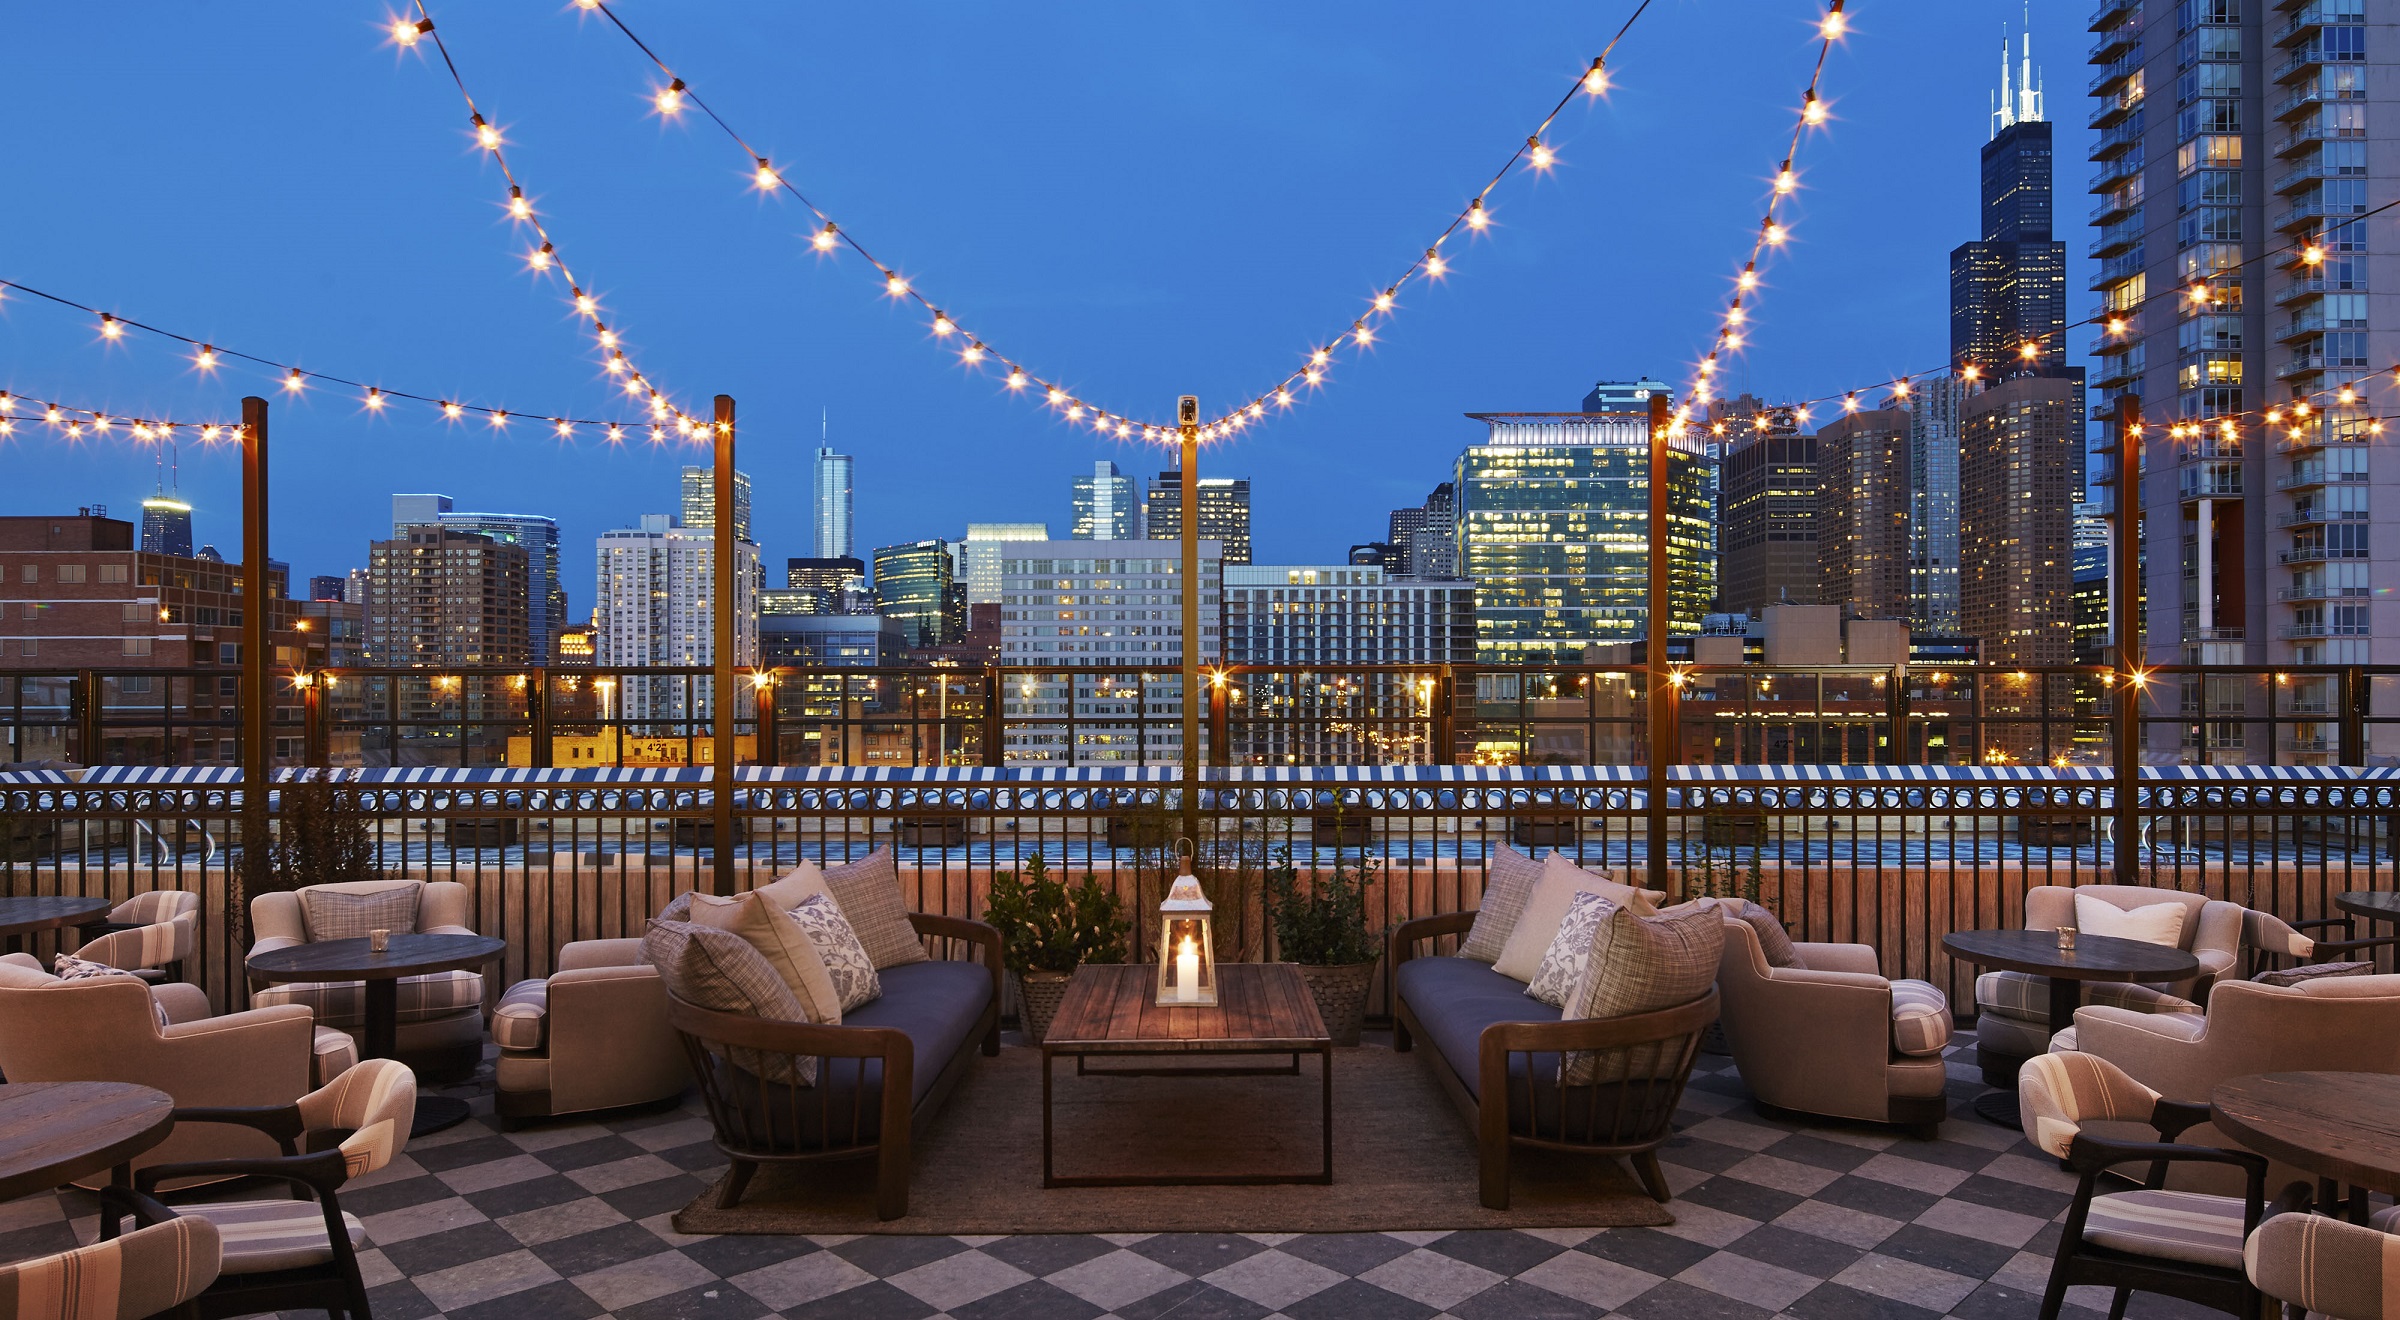 Soho House Chicago_Rooftop of Members House_photo credit is Dave Burk of Hedrich Blessing